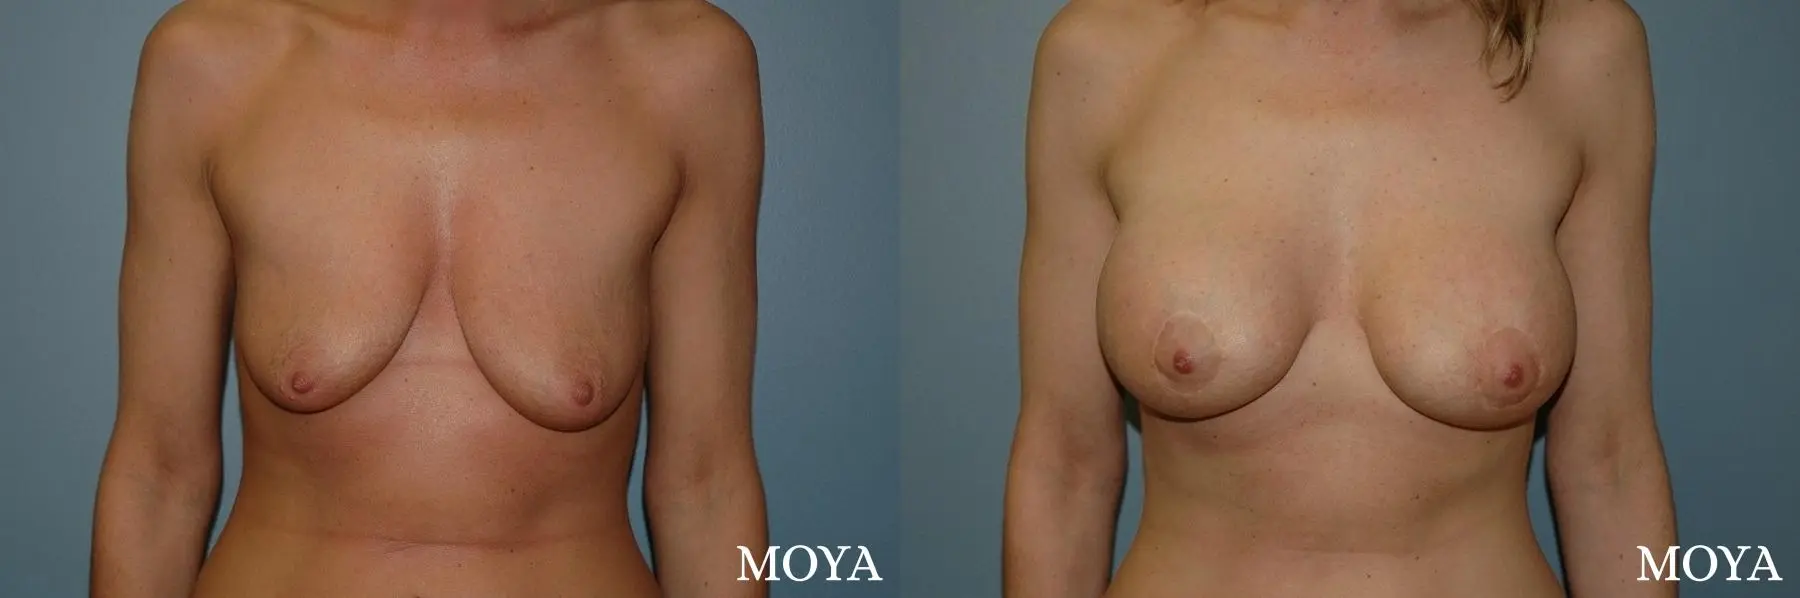 Breast Augmentation With Lift: Patient 2 - Before and After 1